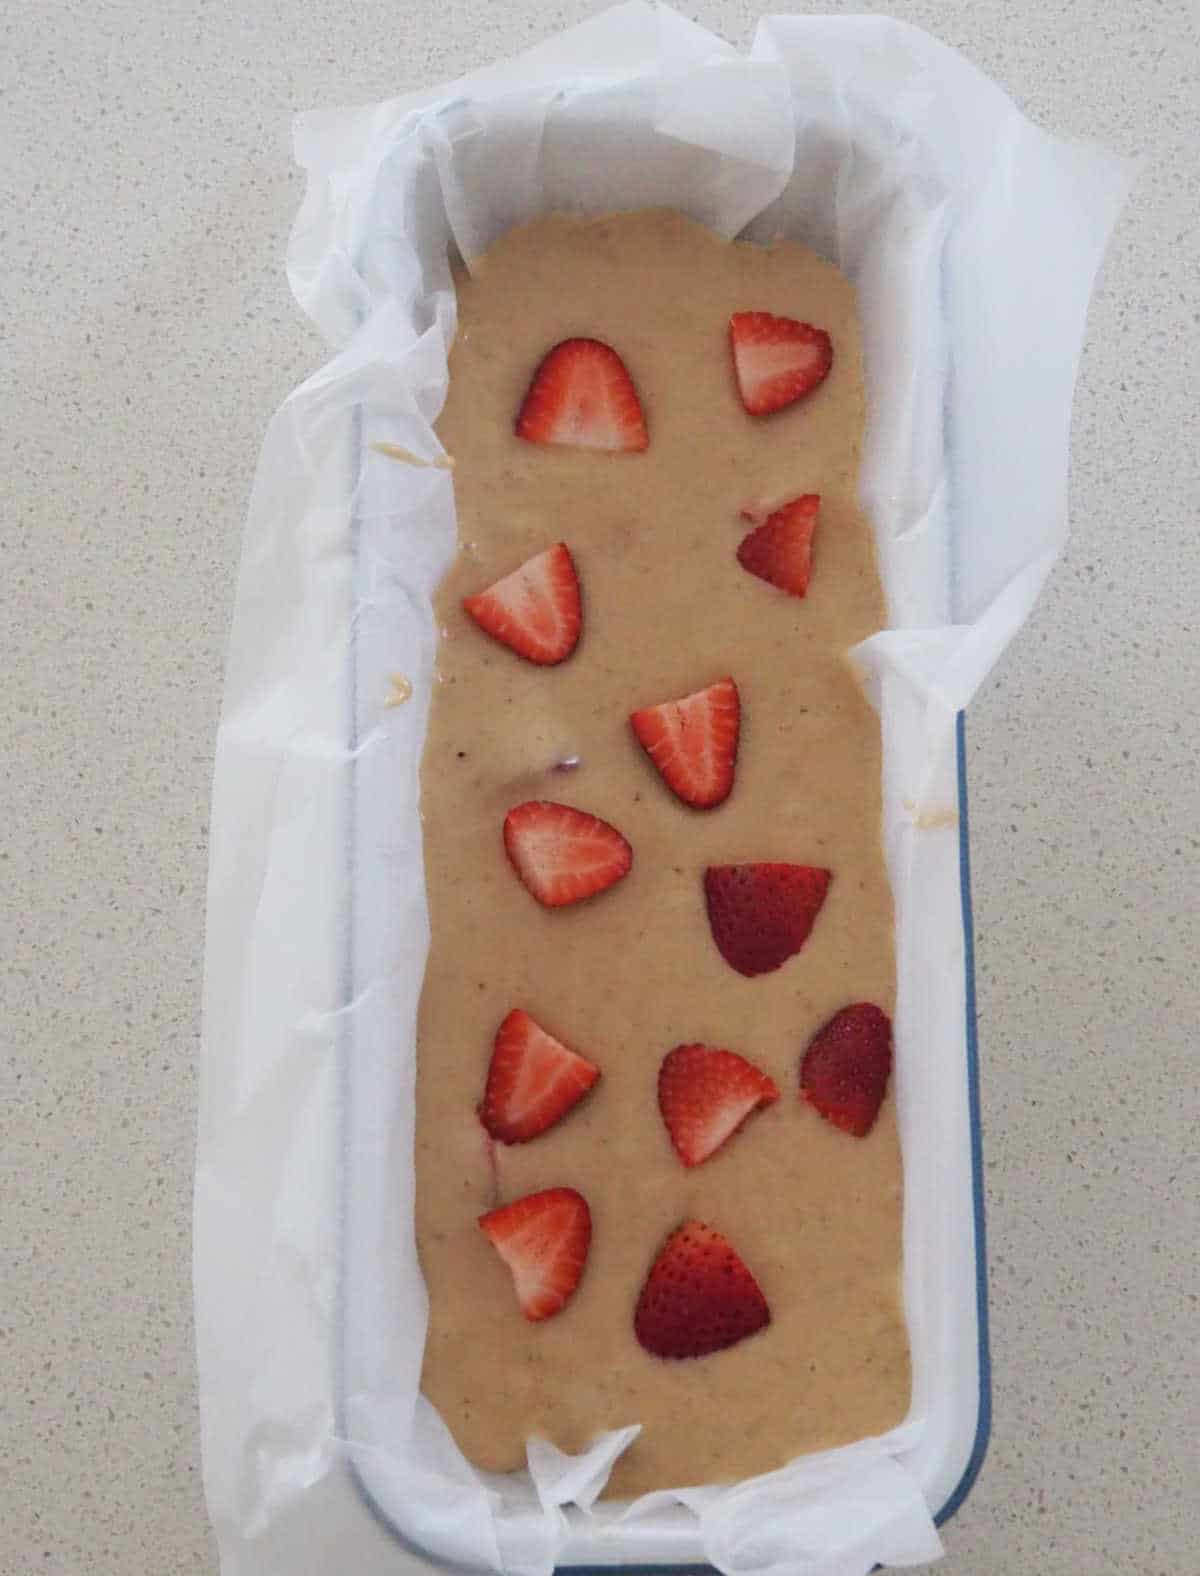 Banana and Strawberry Bread mixture topped with strawberries in a loaf pan lined with baking paper.